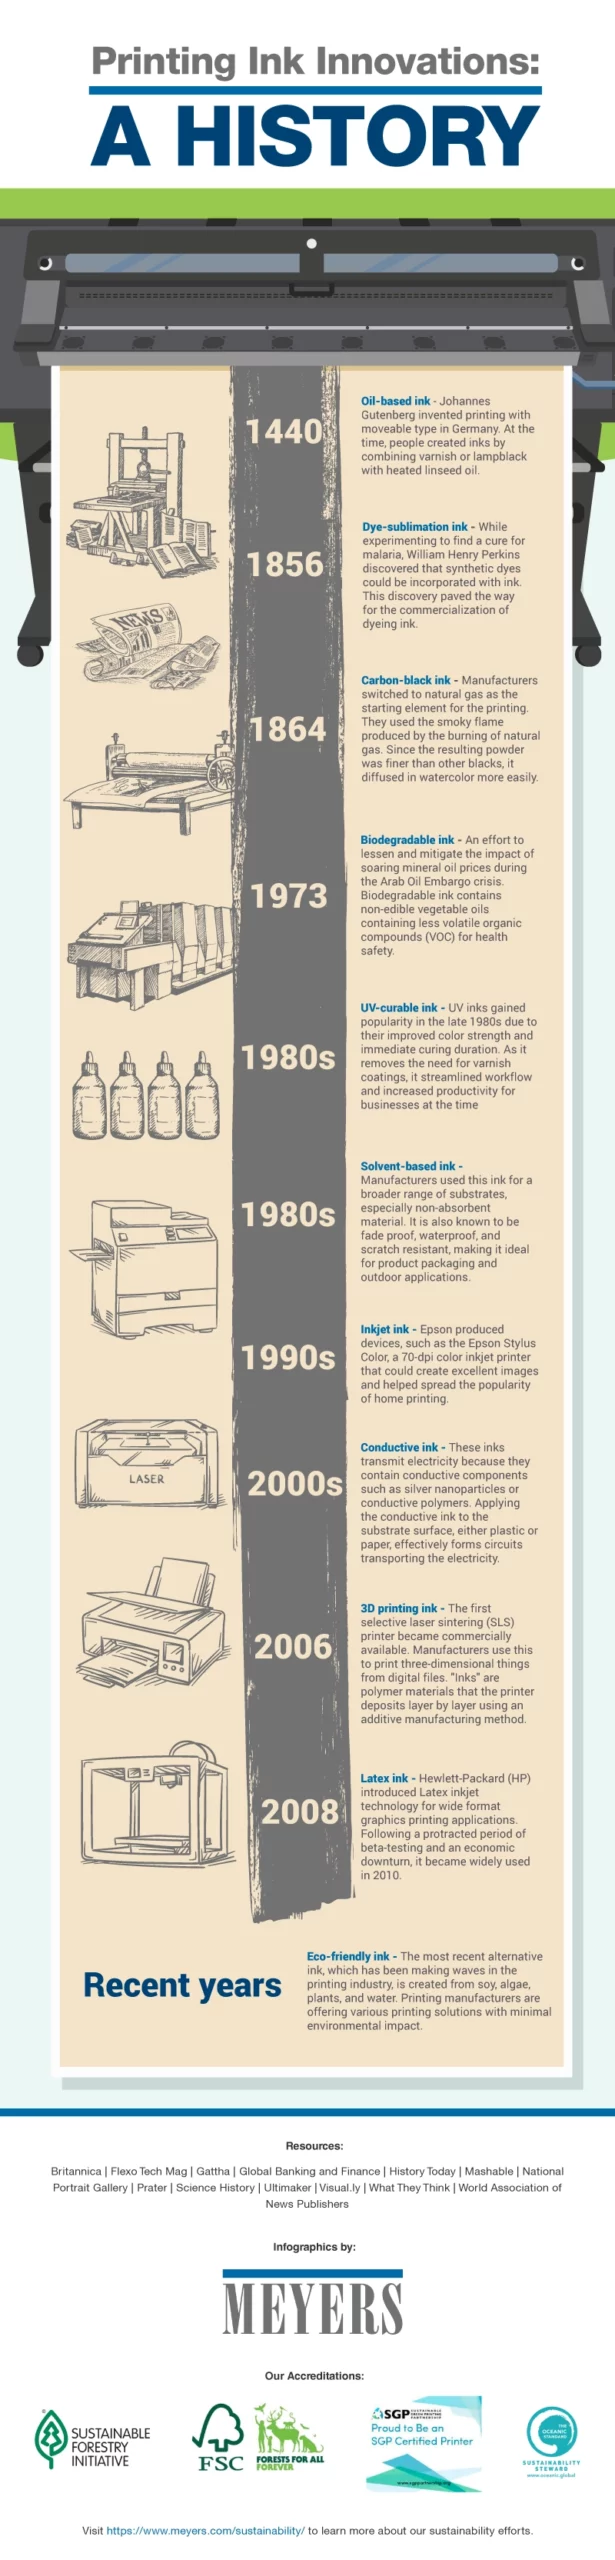 History of Printing Inks infographic